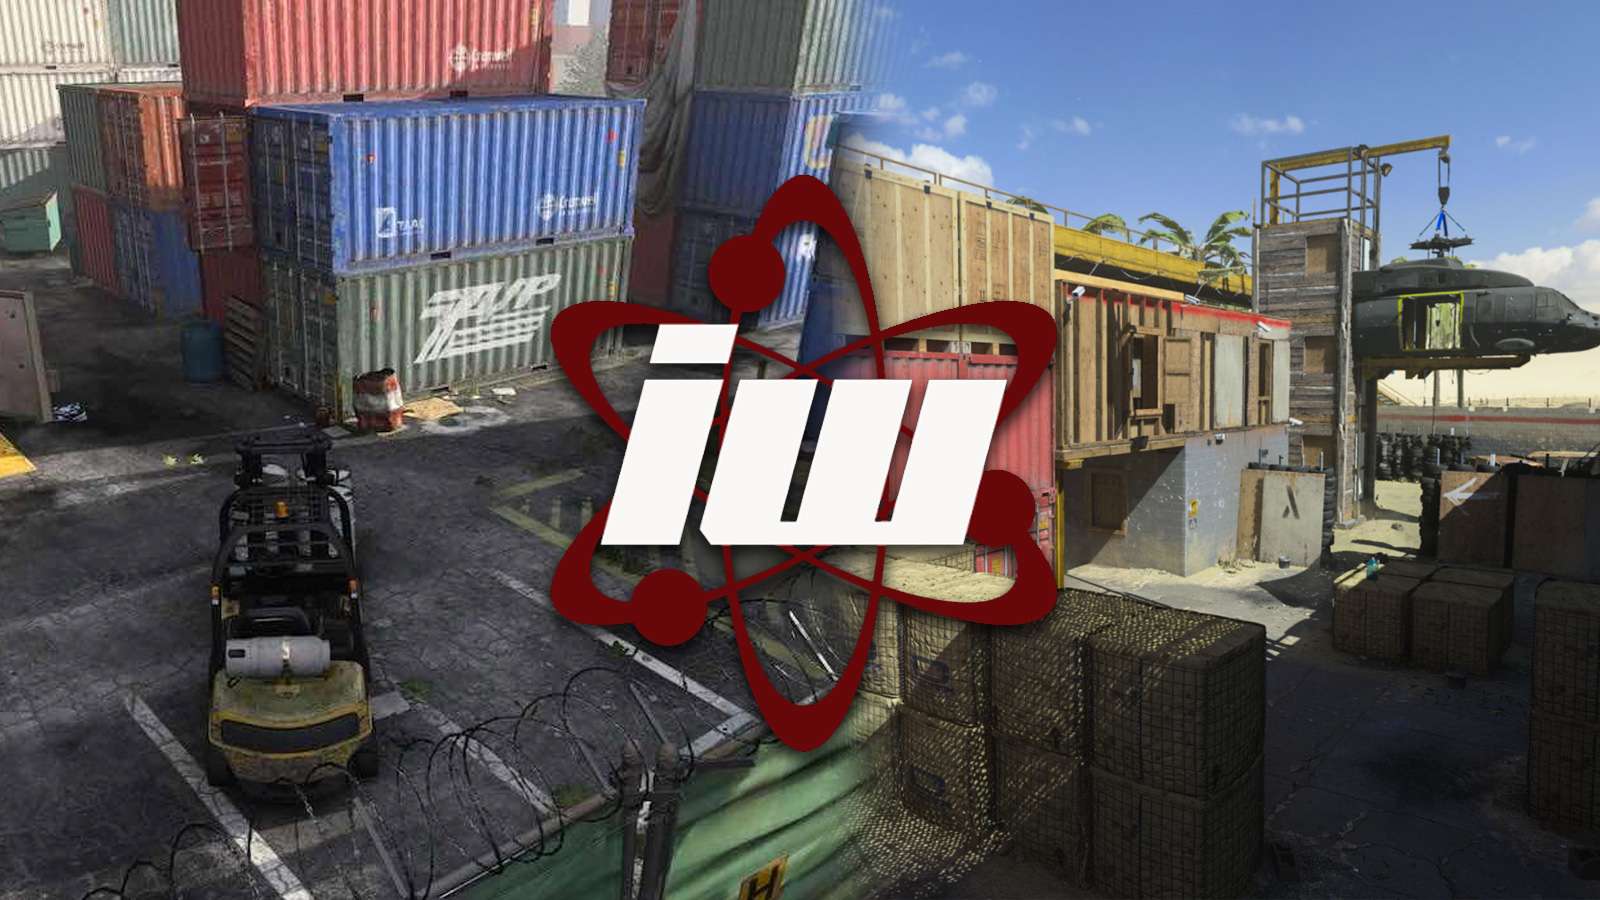 Shipment and Shoot House 24/7 are coming to Modern Warfare.